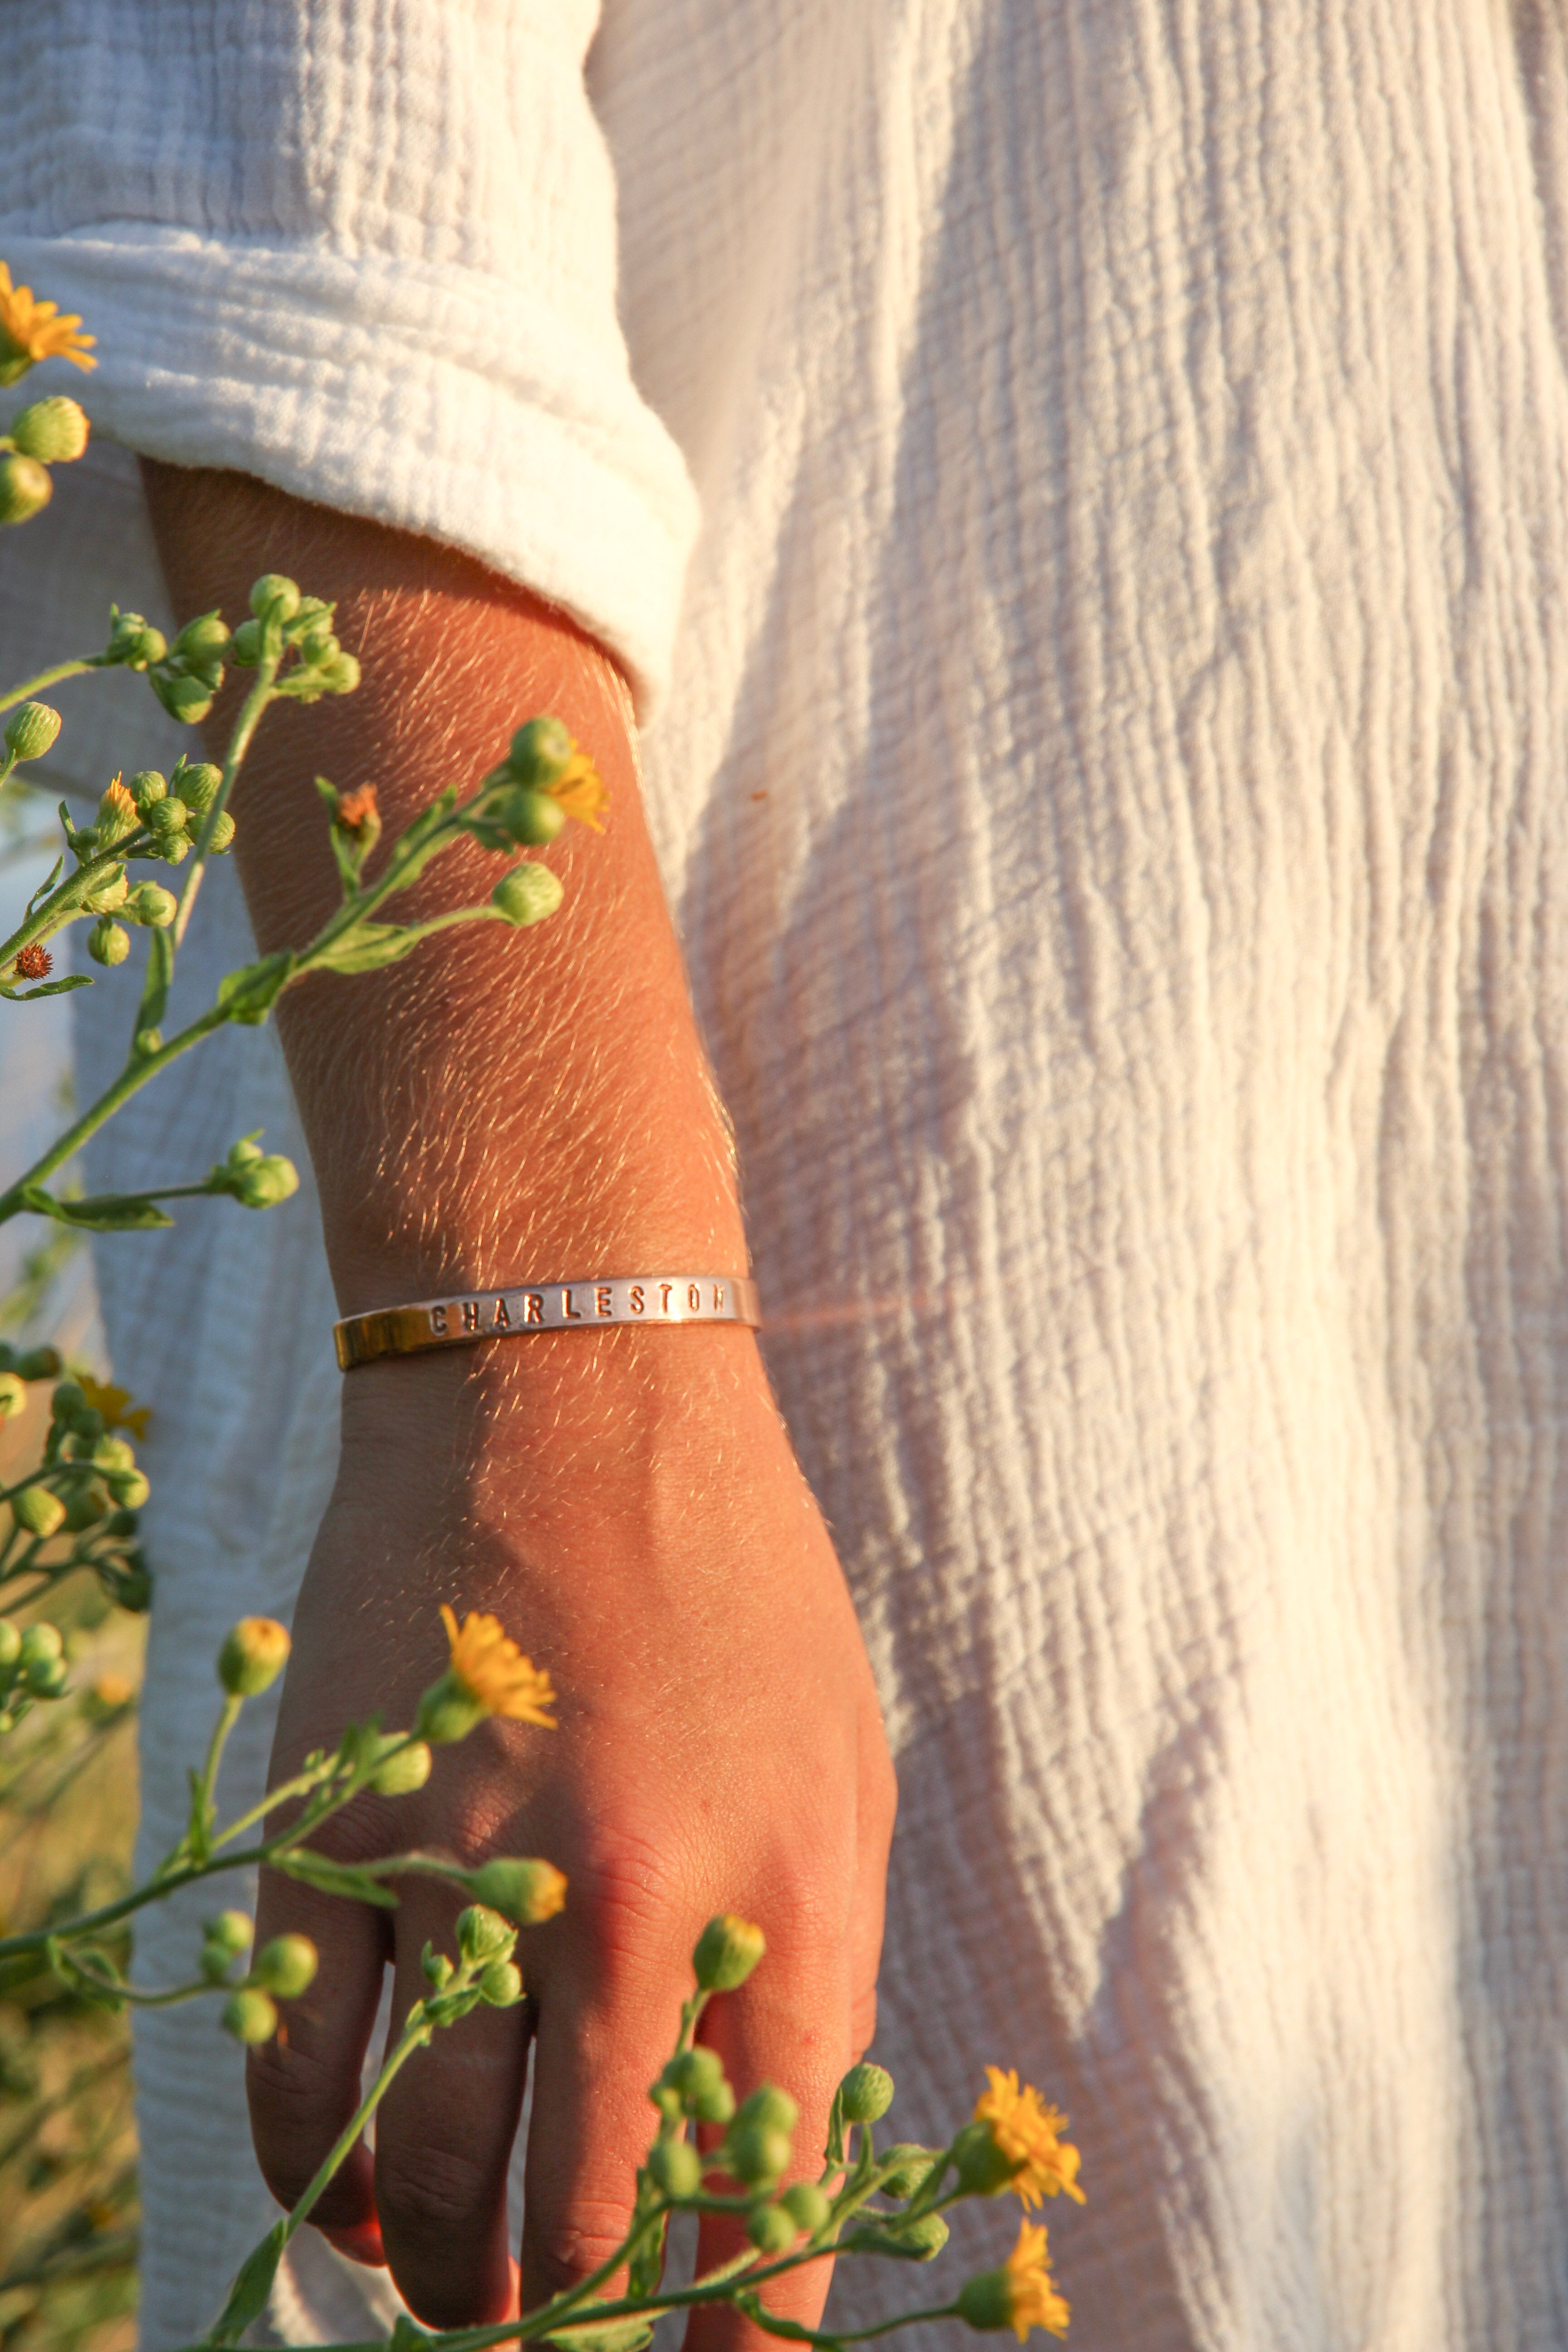 "Charleston" stamped with large letters on the outside of one of our copper cuffs. Shown on a woman's arm.